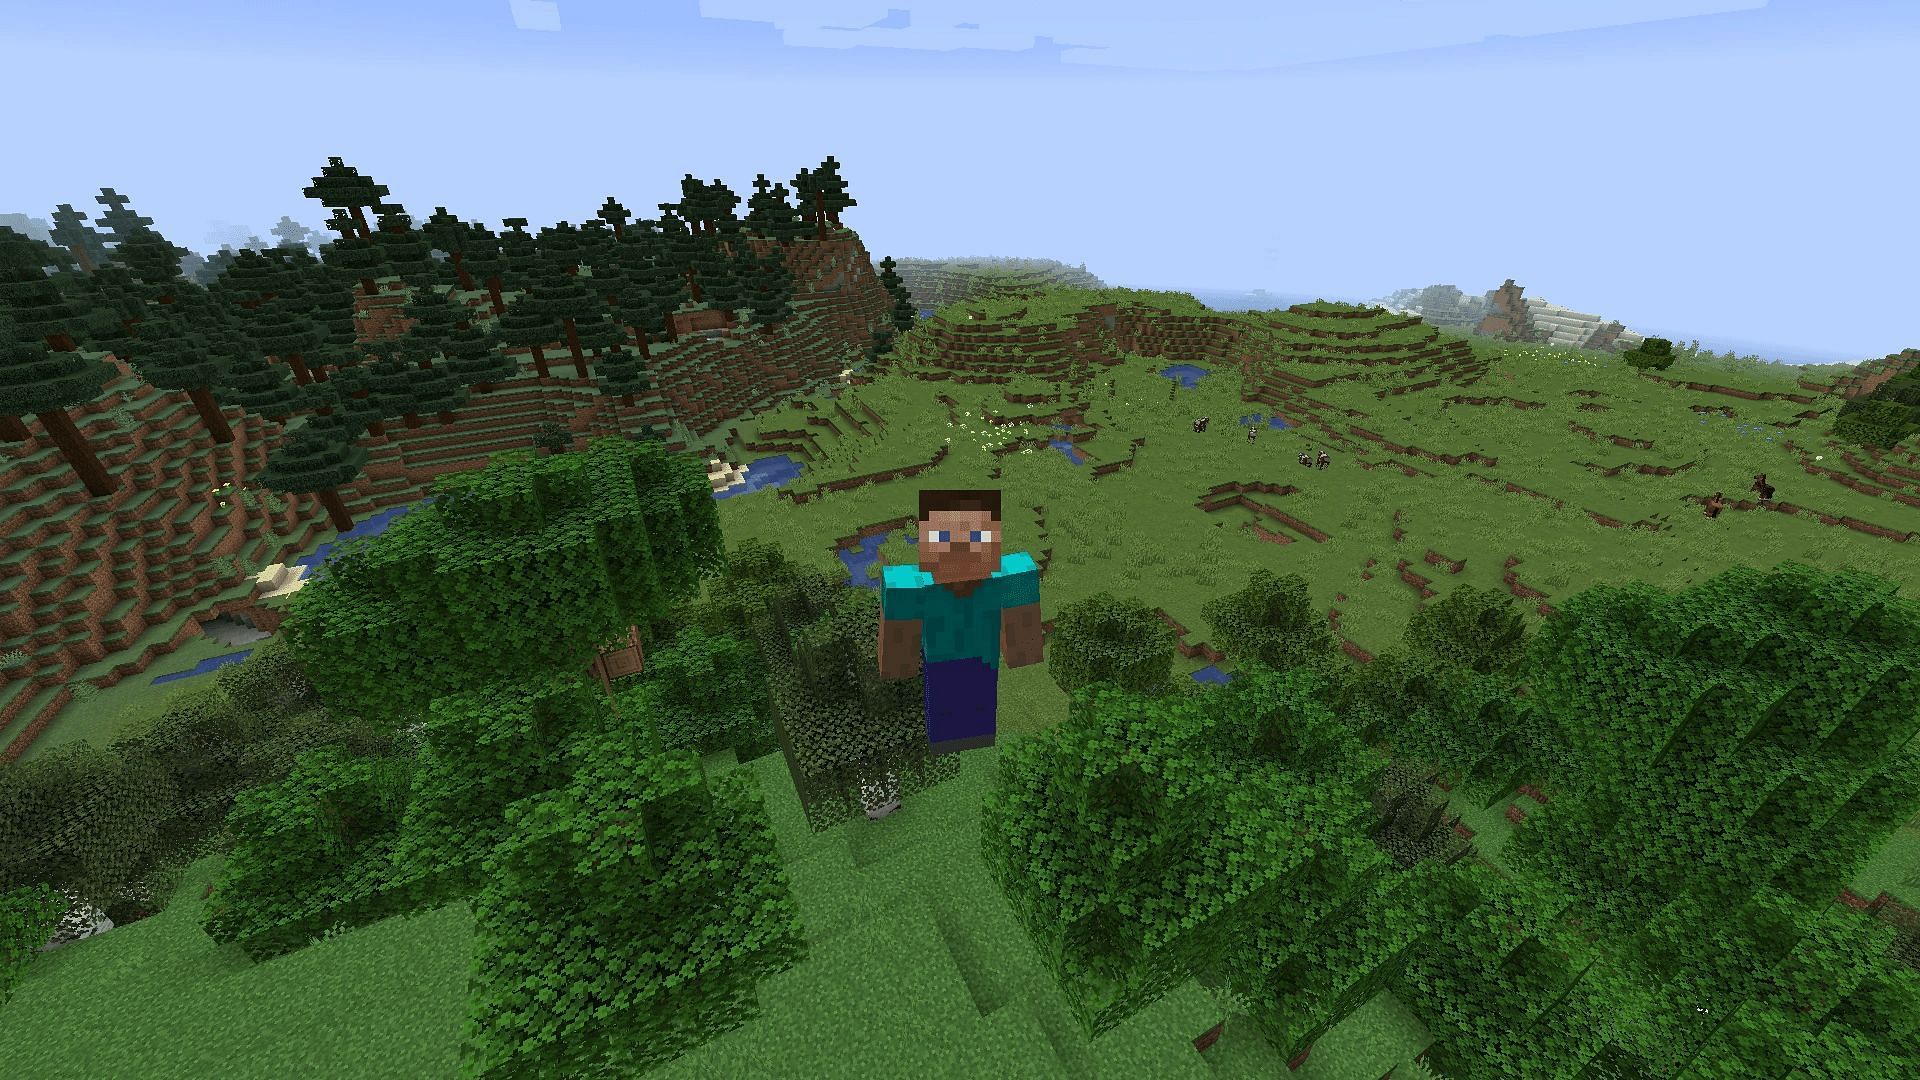 Spectators can fly faster than those in Creative Mode (Image via Mojang)